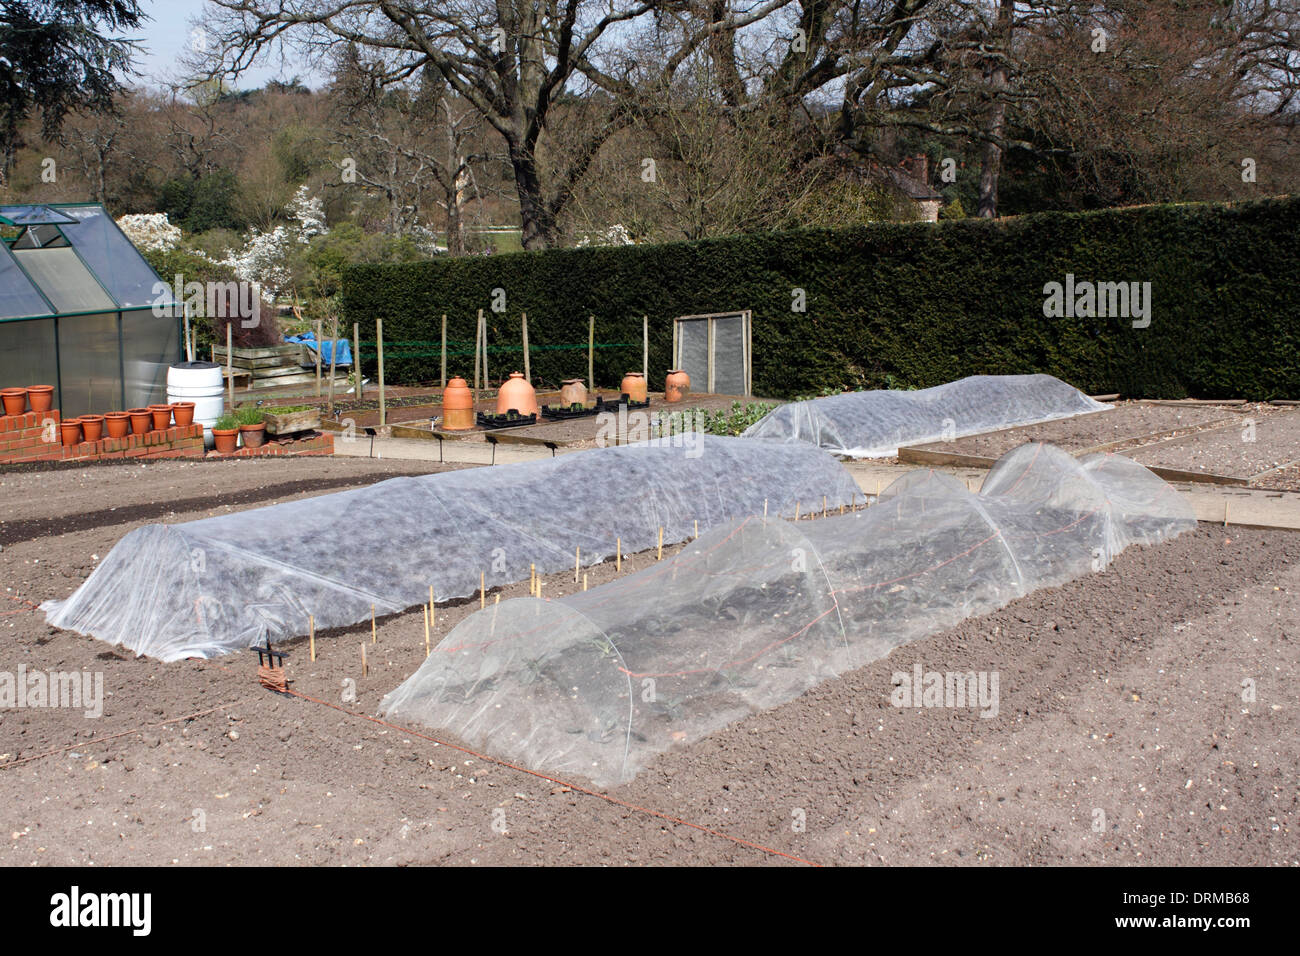 SEEDBEDS PROTECTED BY HORTICULTURAL FLEECE. Stock Photo